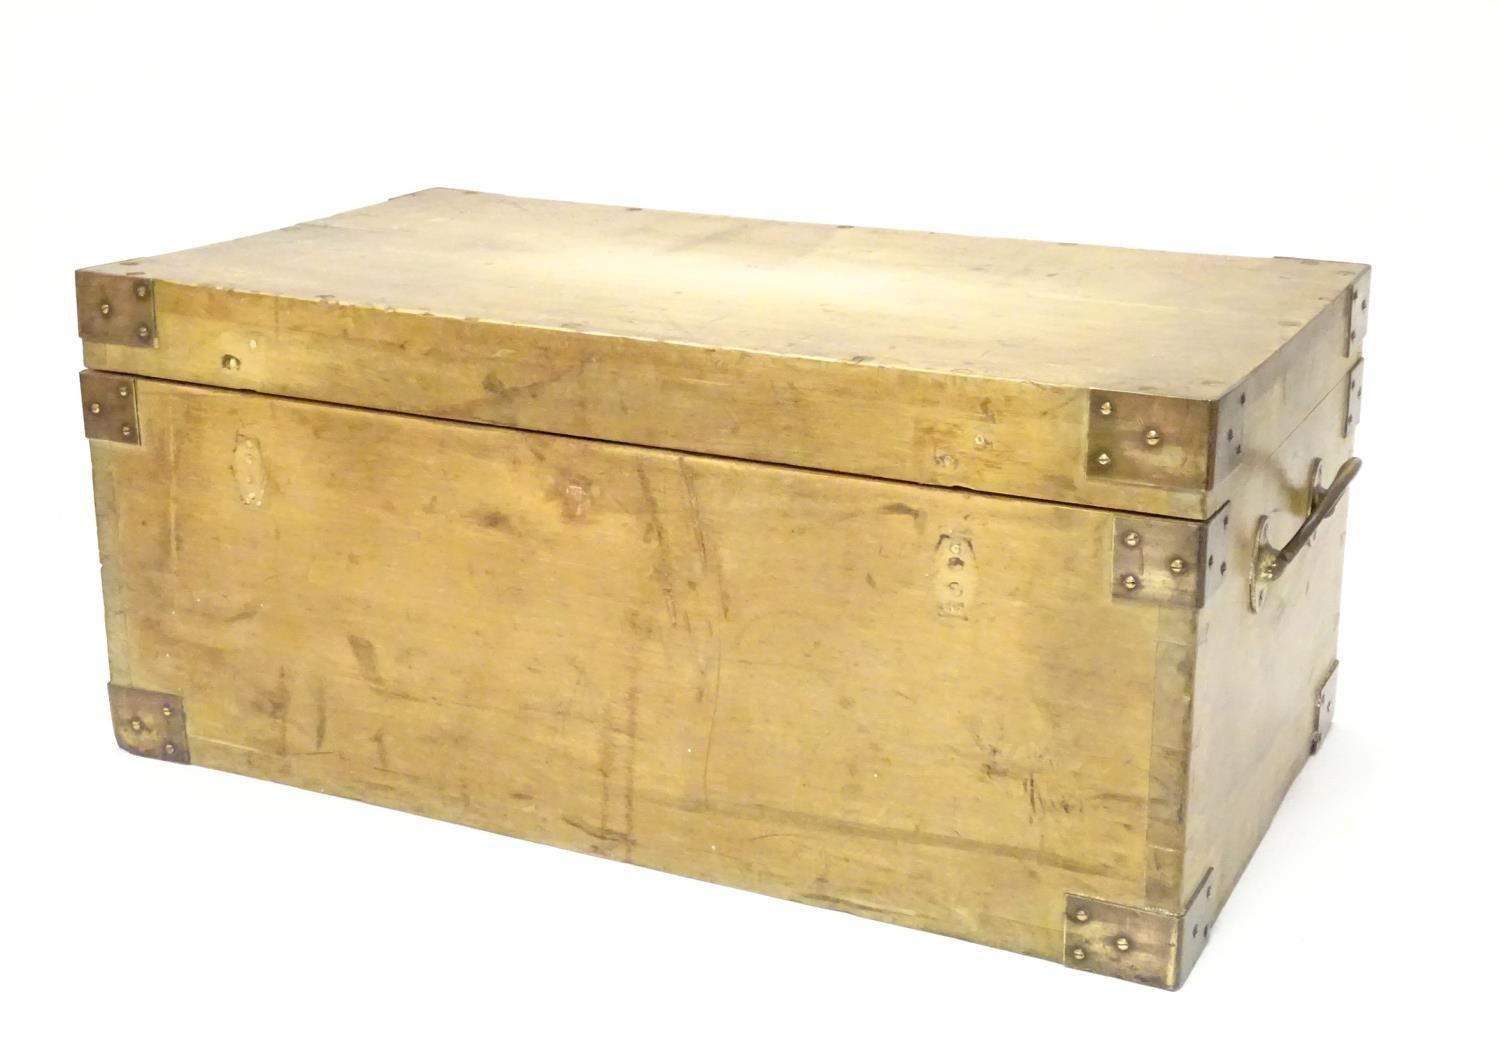 An early to mid 20thC hardwood box with brass carrying handles and brass mounts to the corners